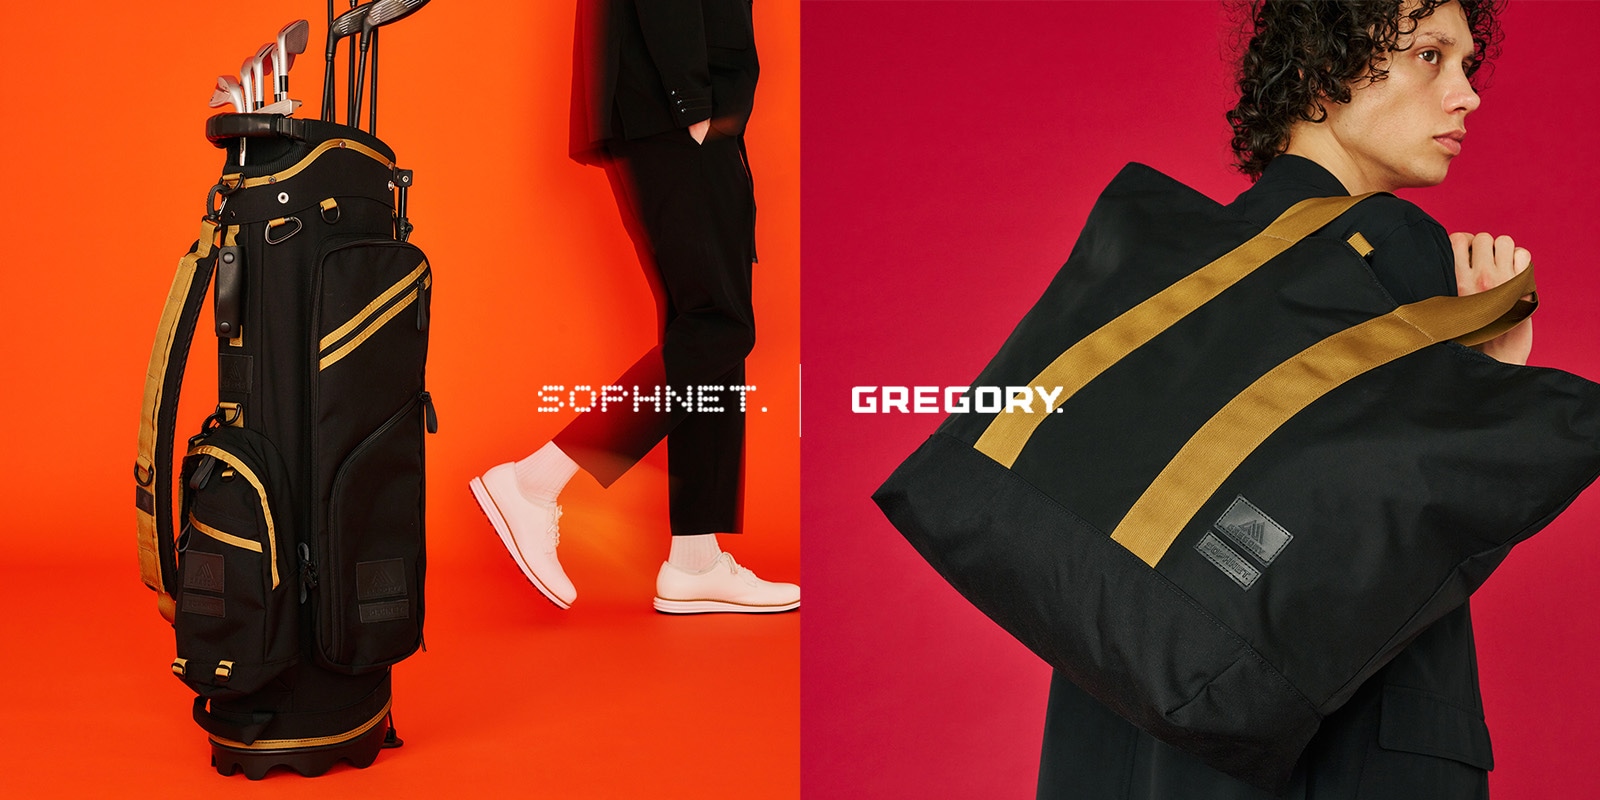 GREGORY GOLF TOTE BAG SOPHNET. ボールケース付